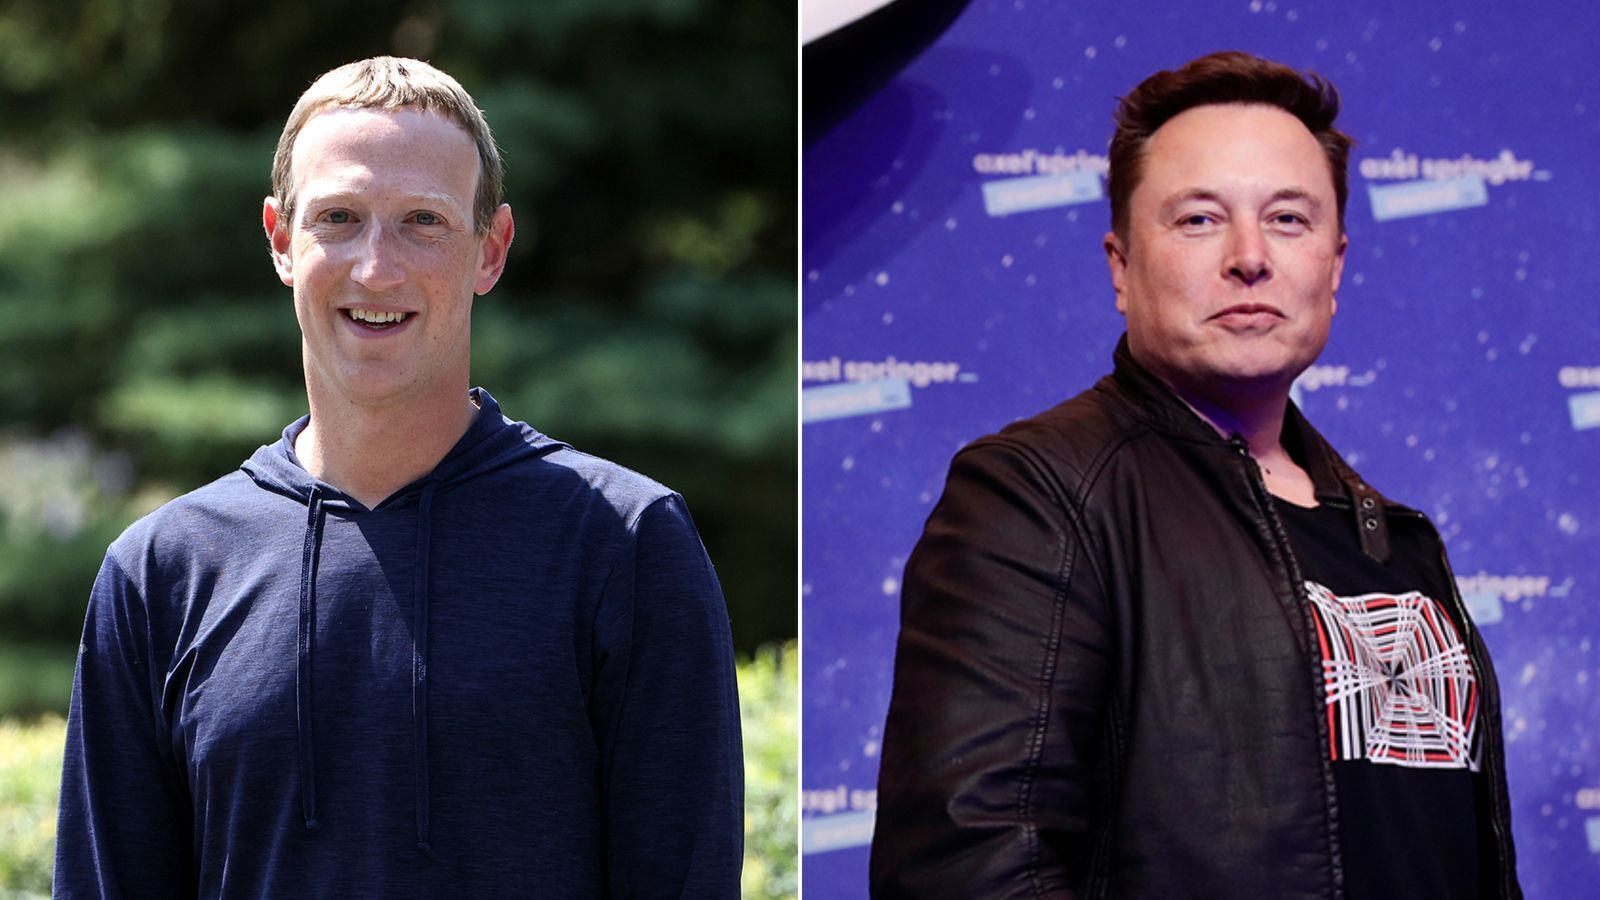 Mark Zuckerberg ready to fight Elon Musk, Lizzo dropped as Super Bowl LVII show contender, and more celeb news